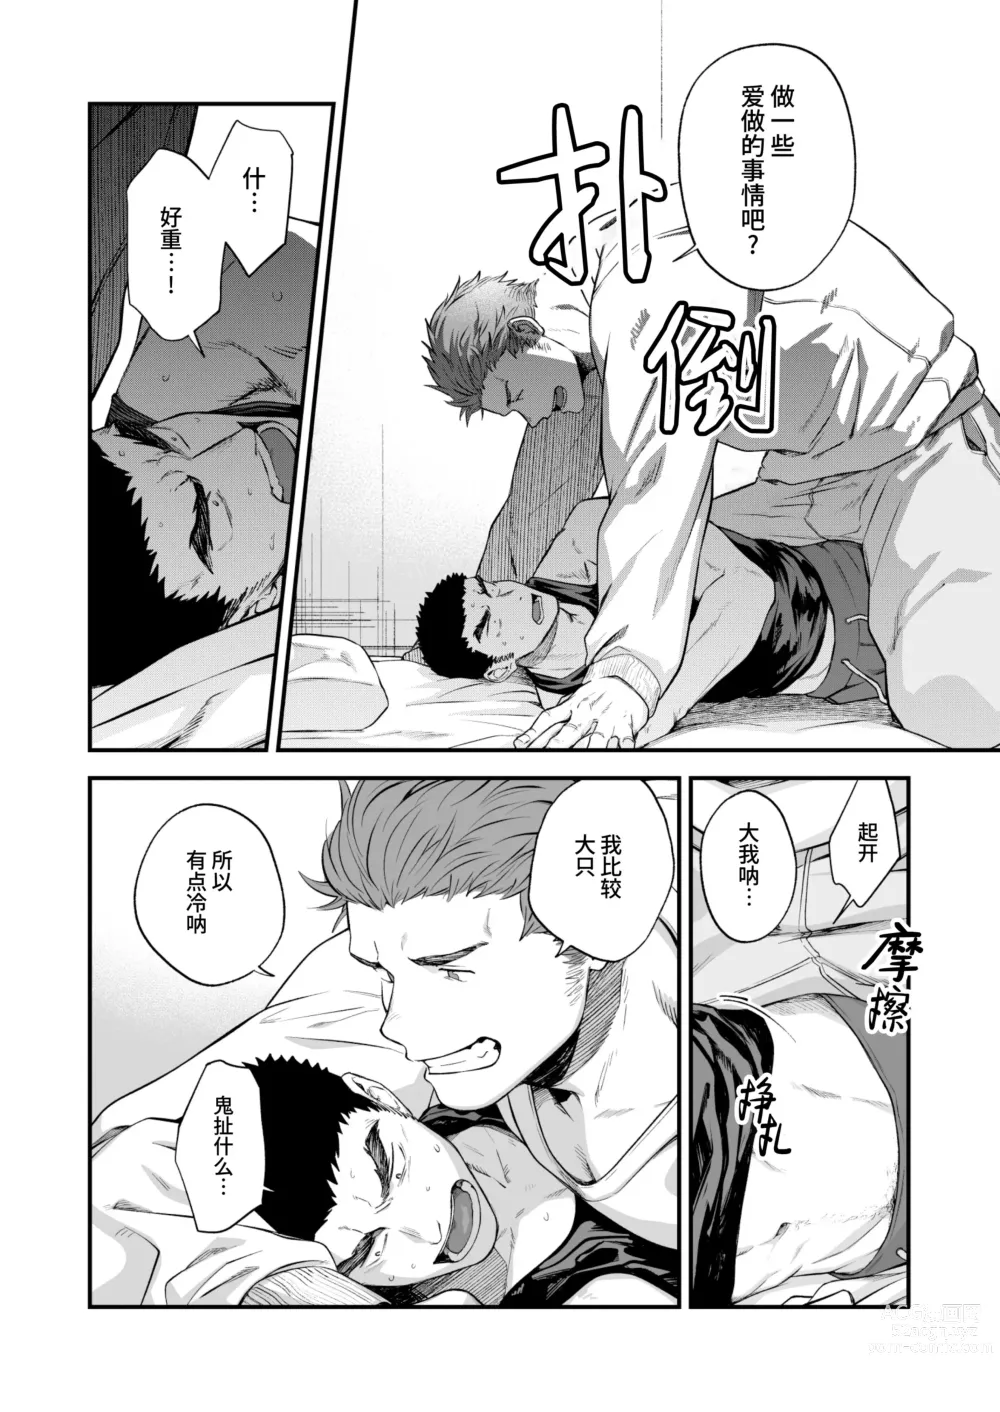 Page 4 of doujinshi 体格差 (decensored)